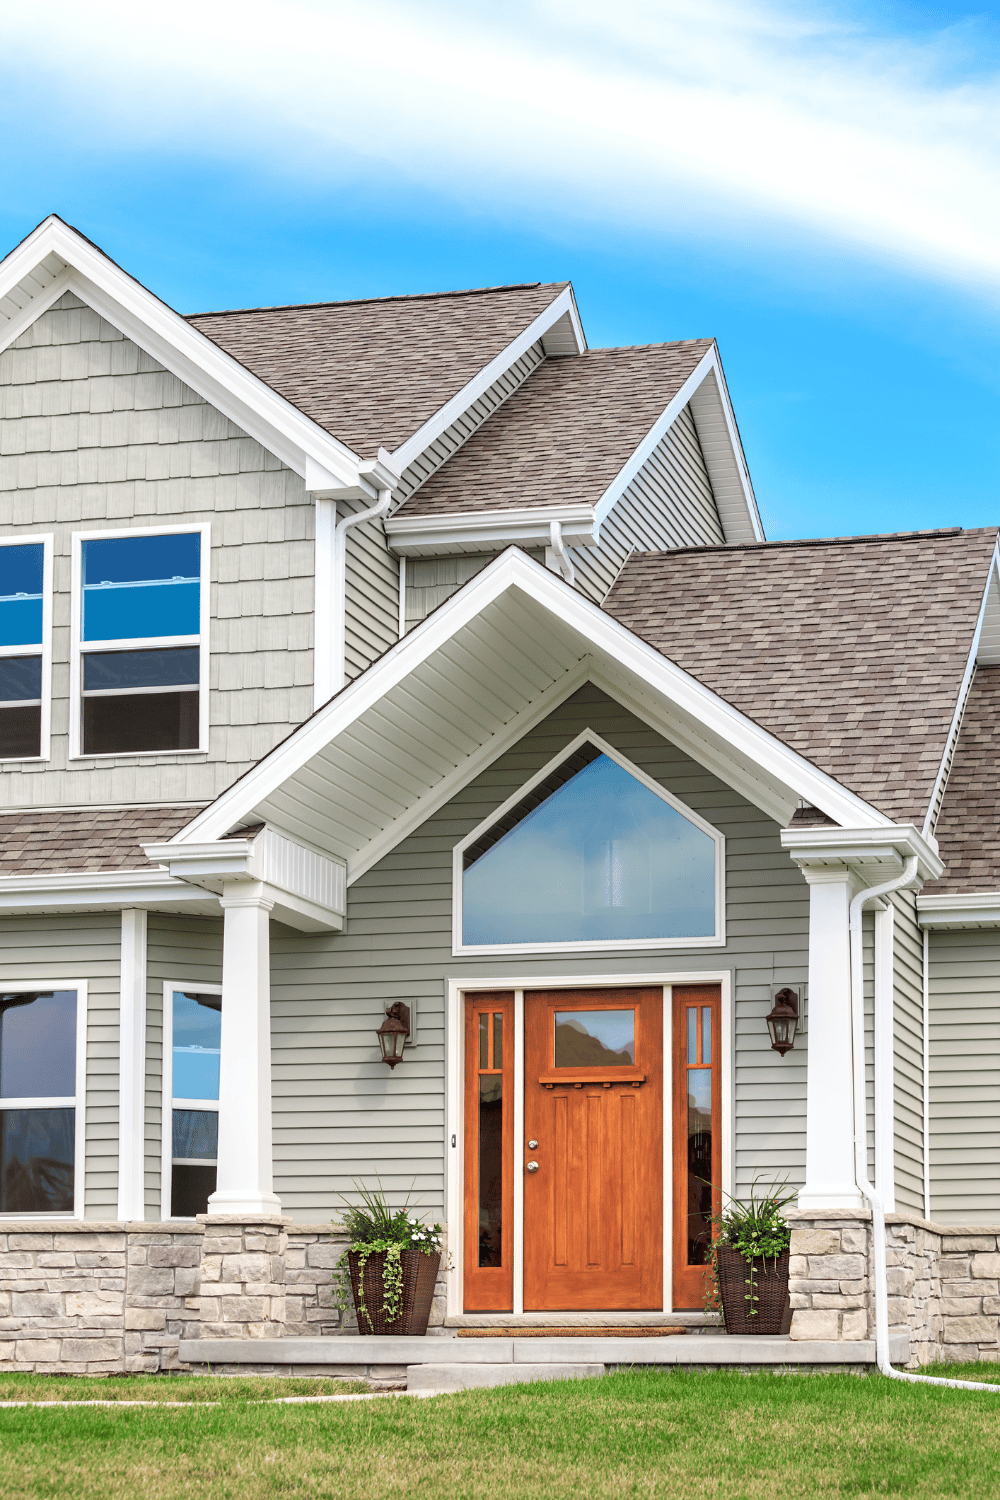 Enhance Your Home’s Exterior with These Impressive Roofing Style Options